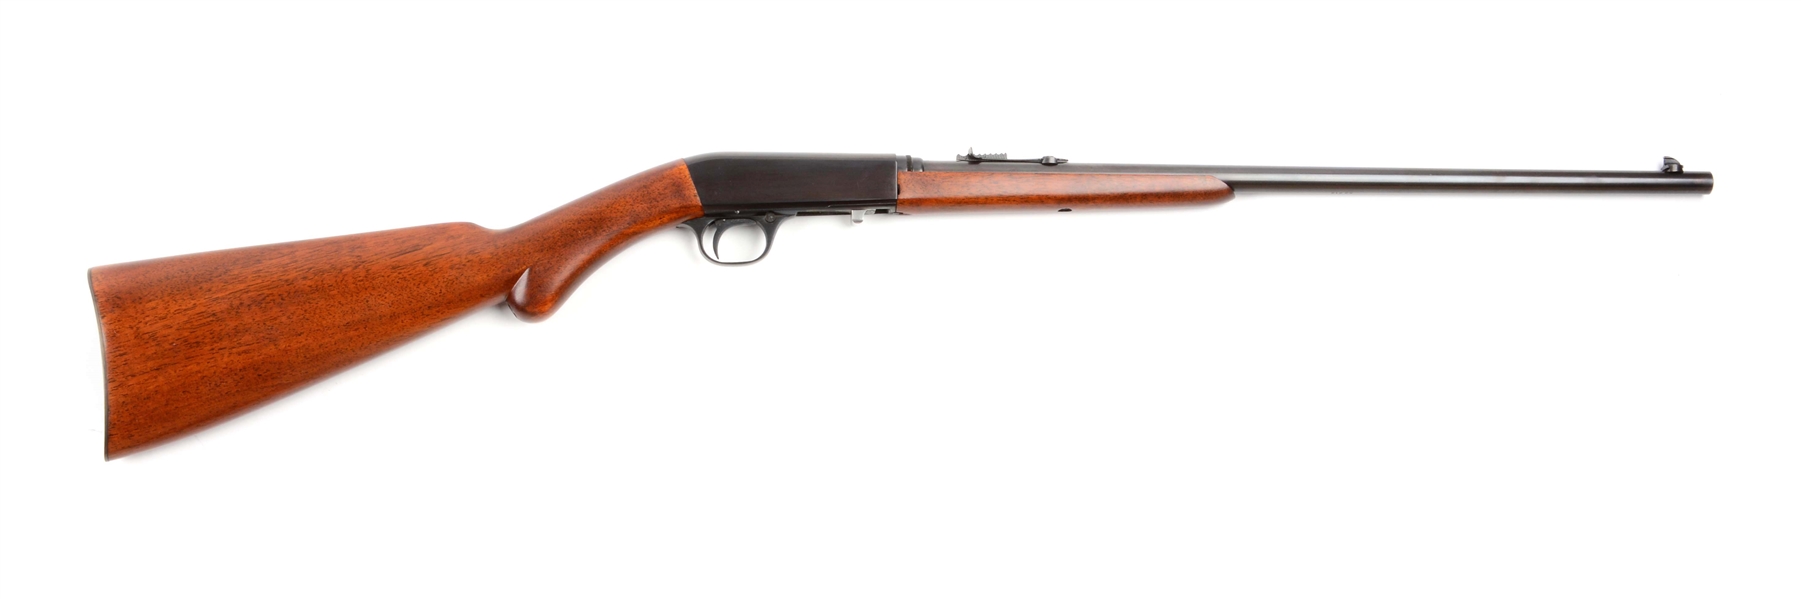 (C) EARLY FN BROWNING .22 SHORT SEMI-AUTOMATIC RIFLE.